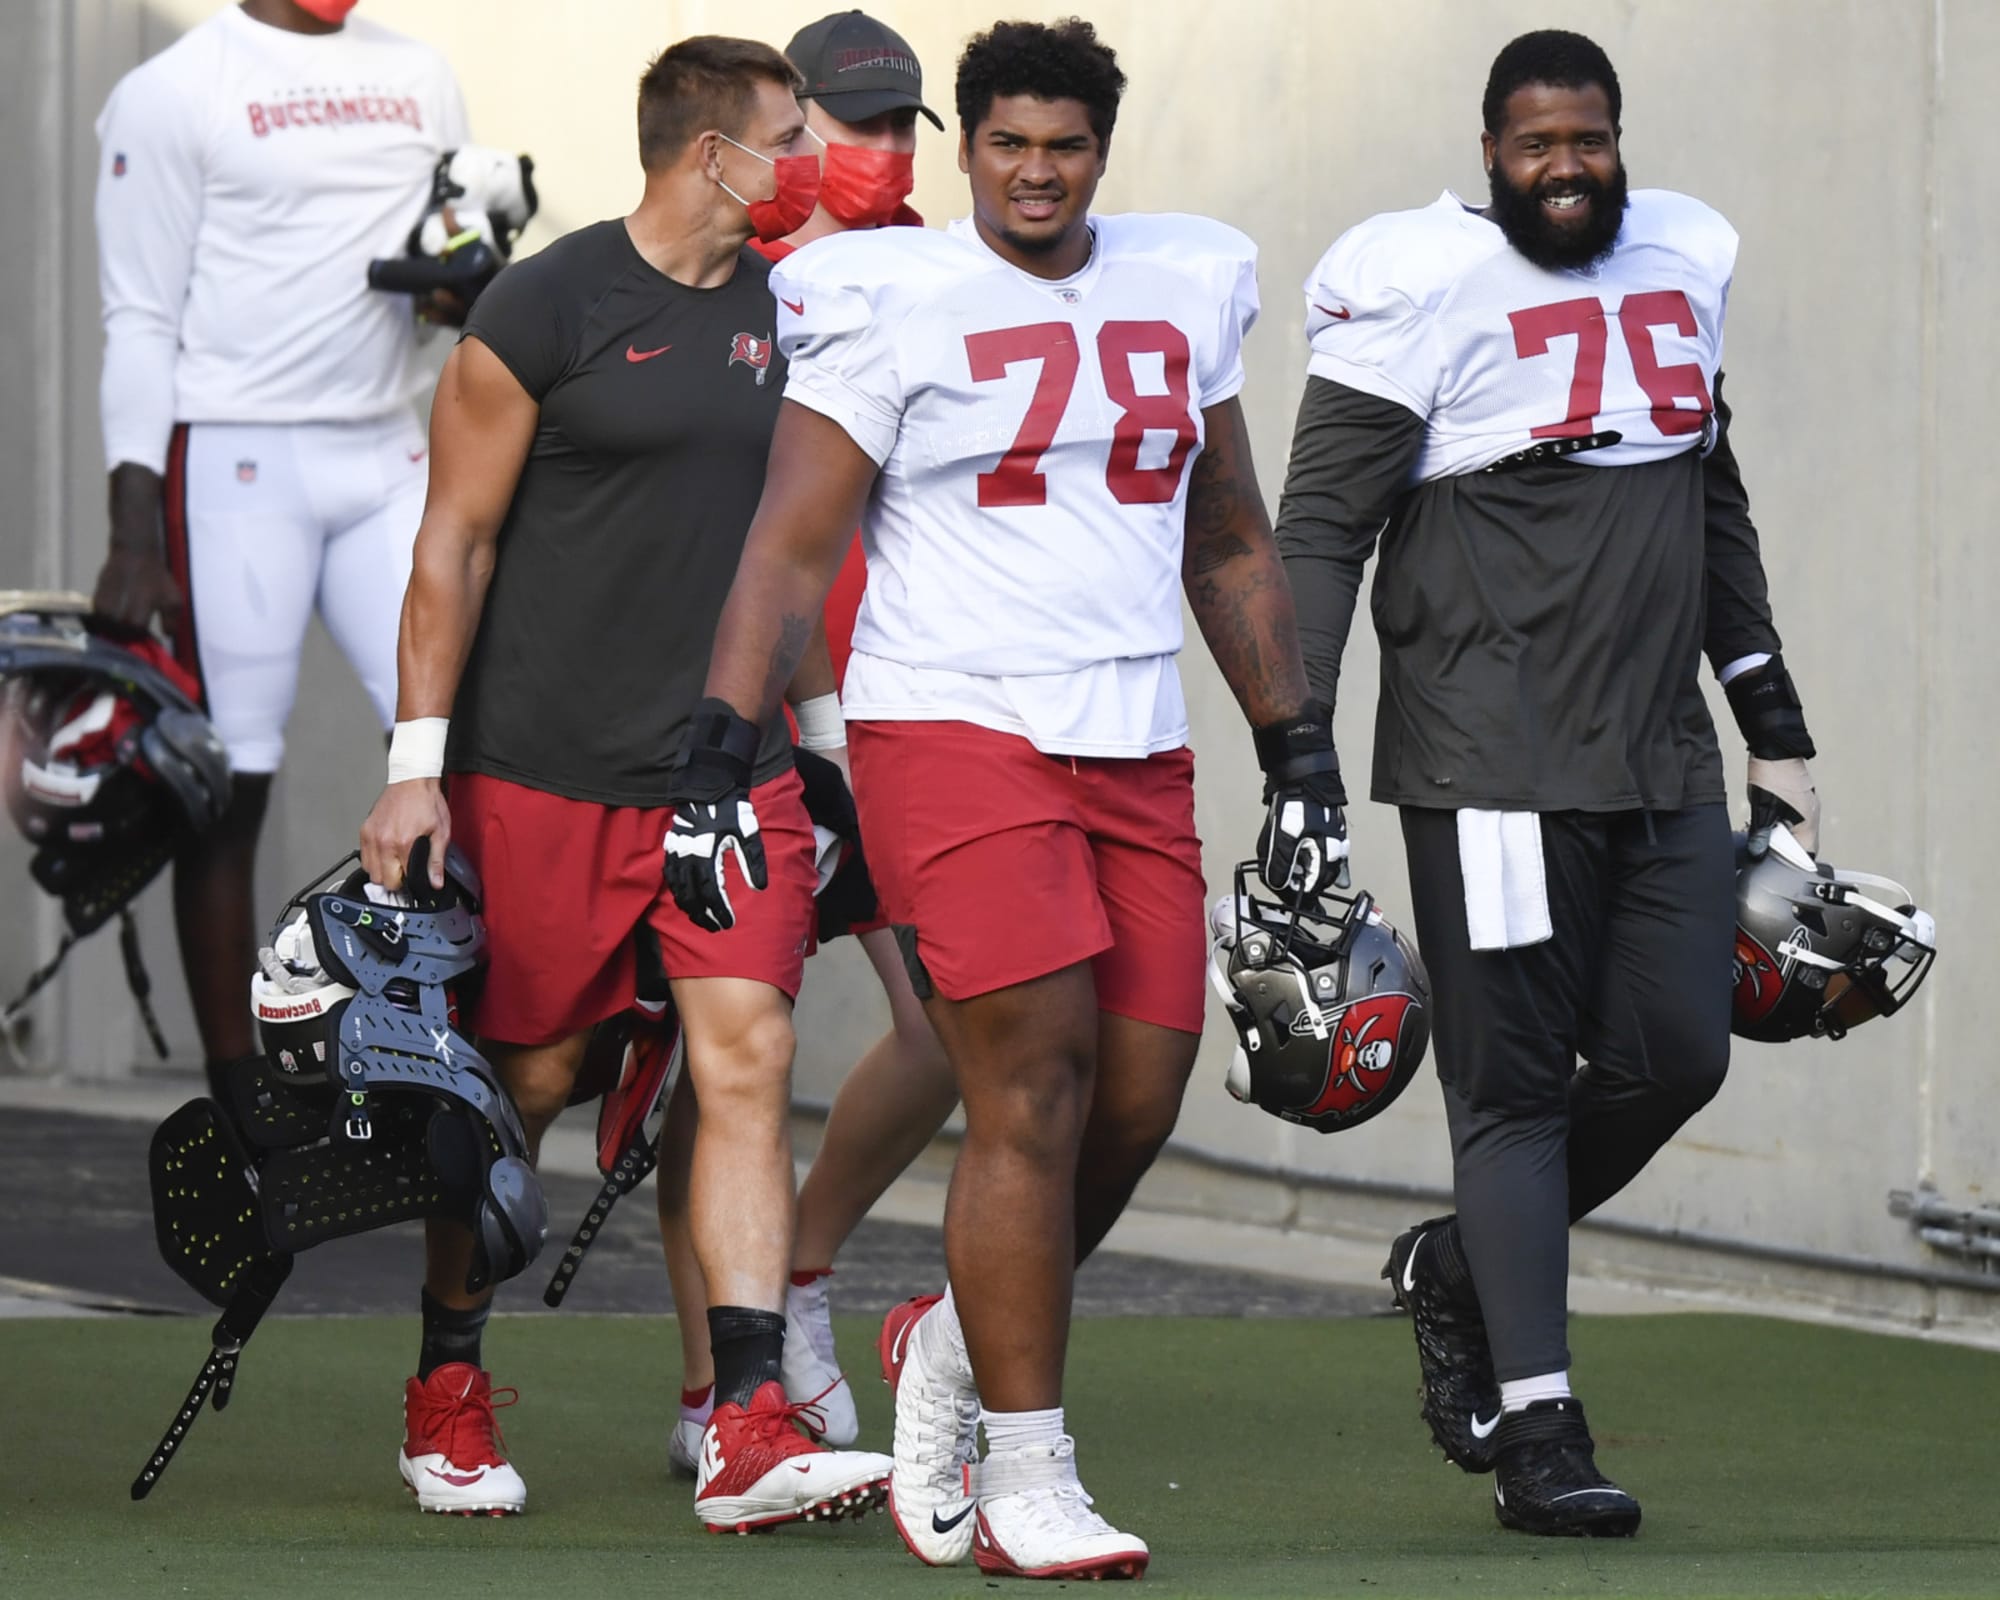 Tampa Bay Buccaneers offensive line rated as top-5 in NFL